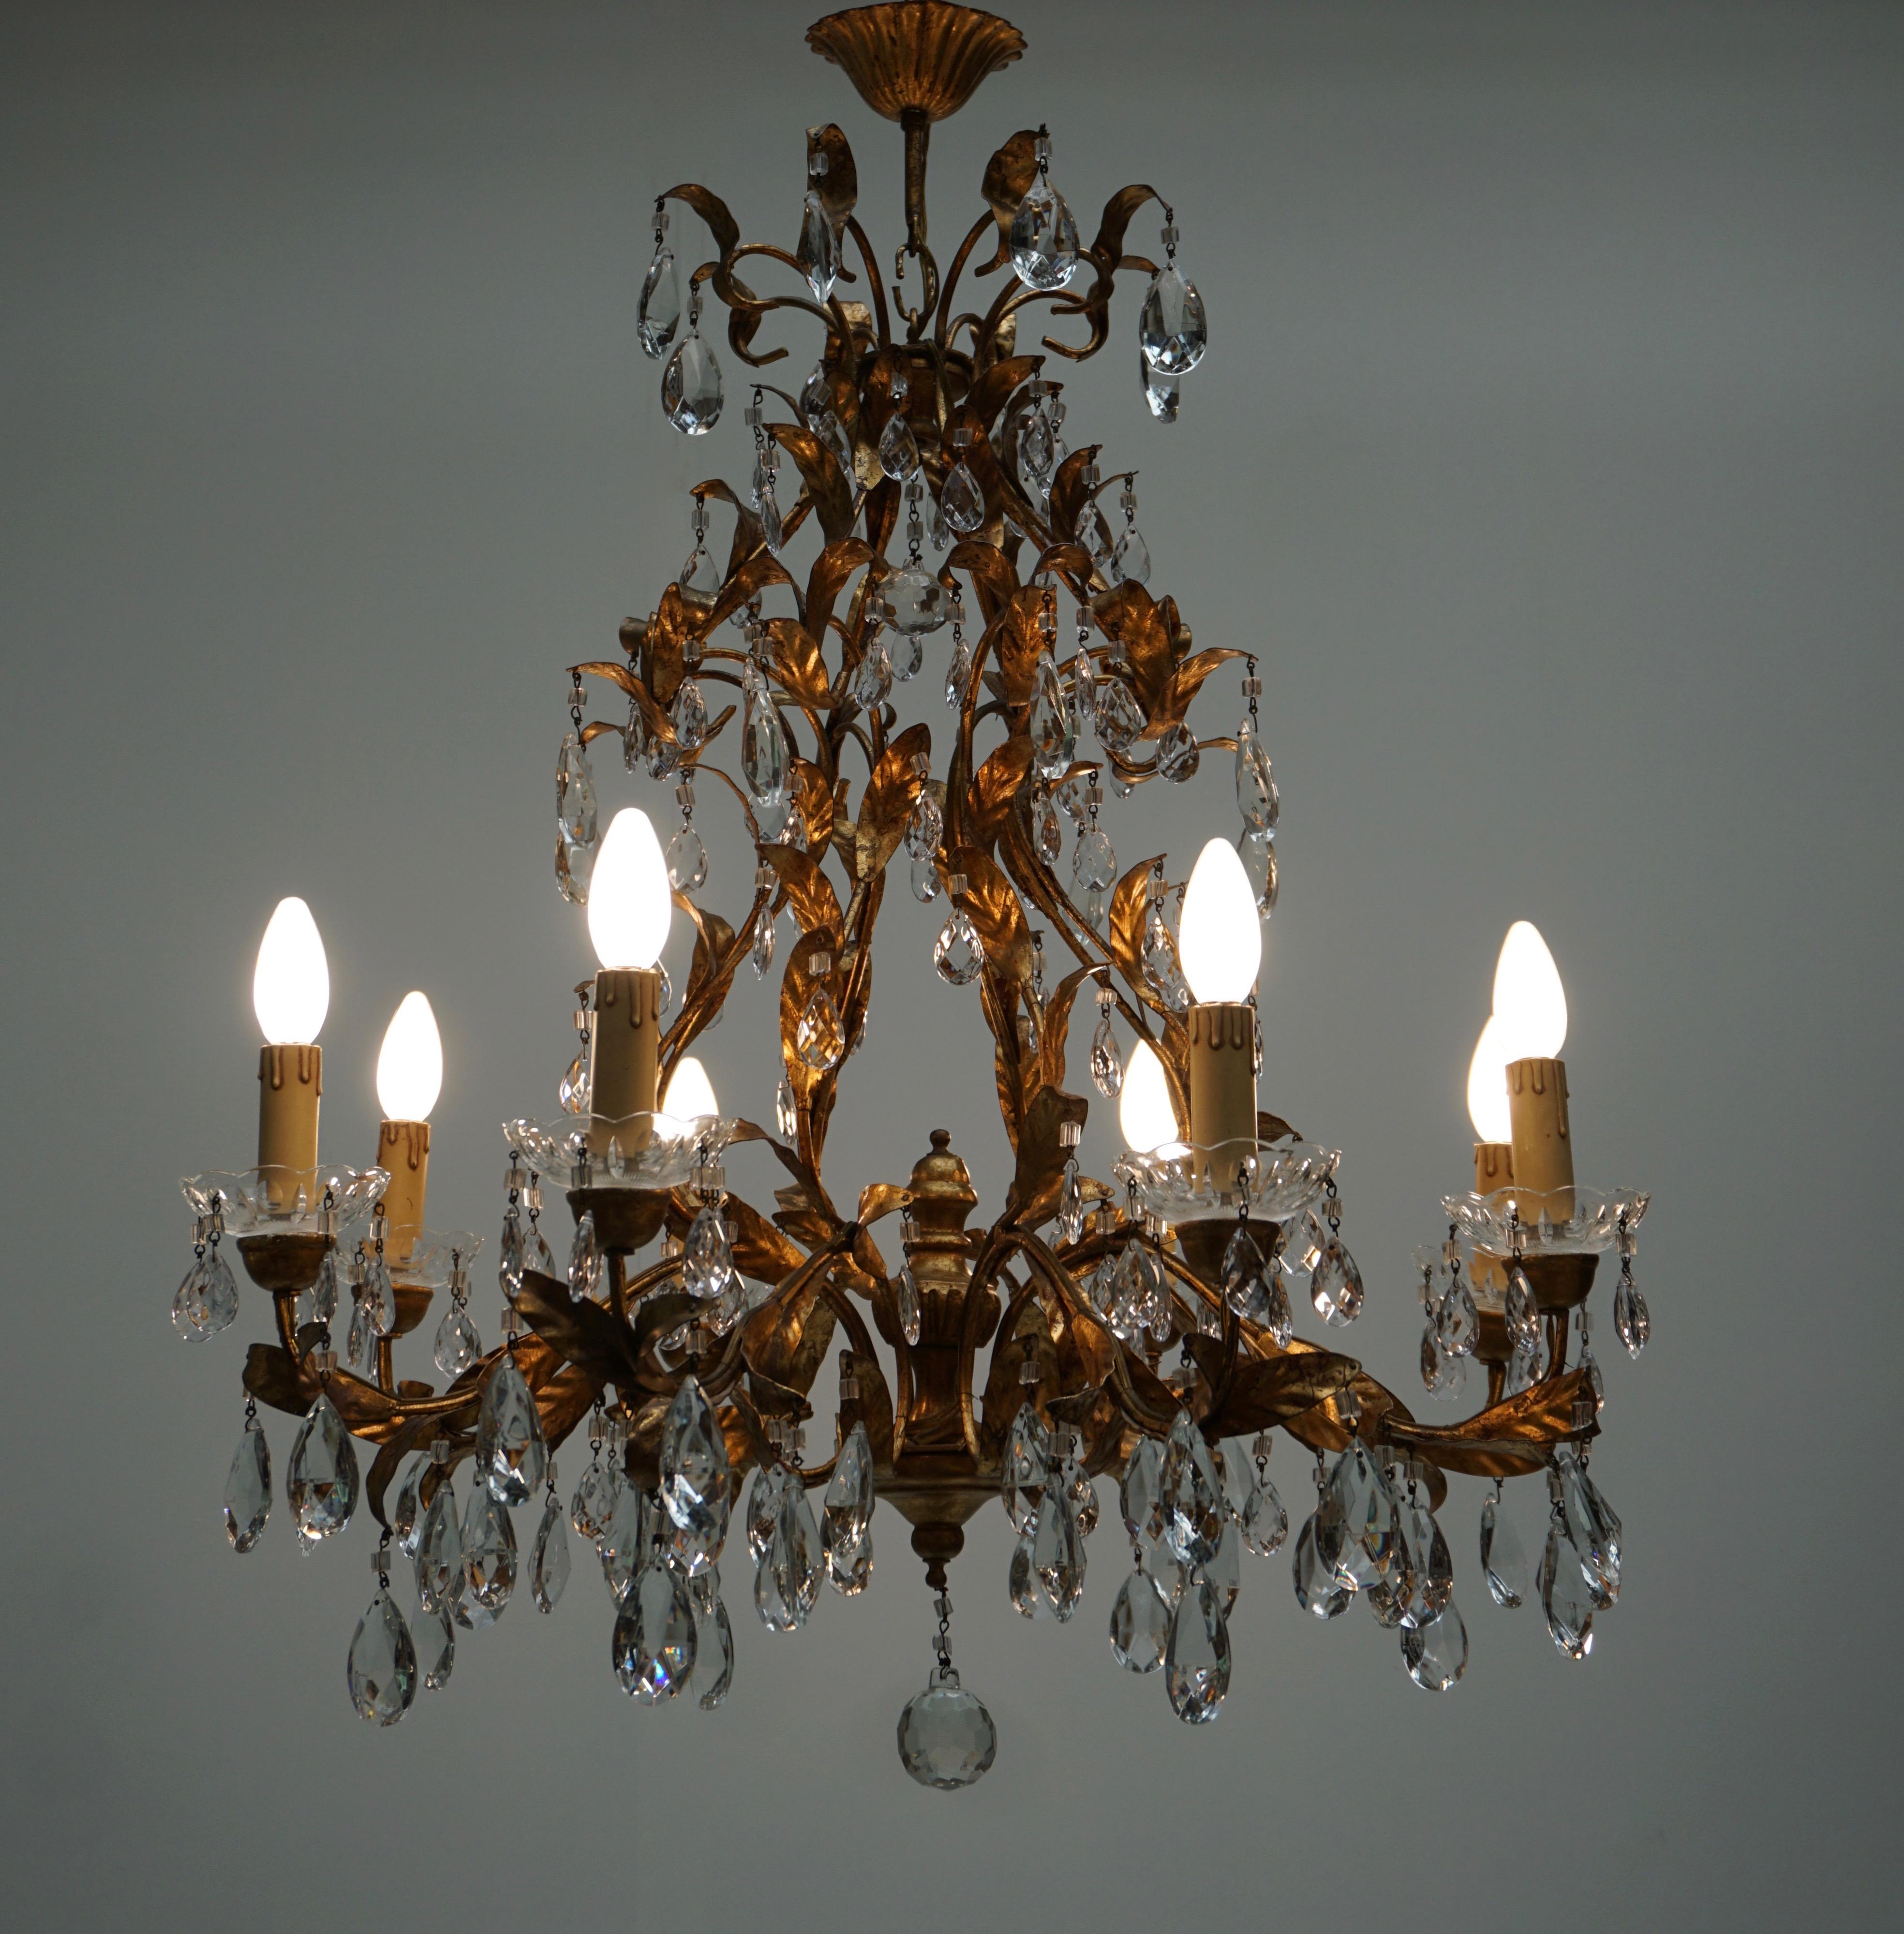 Stunning large brass eighty-light, Italian chandelier with leaves and crystal.
Measures:
Diameter 77 cm.
Height fixture 84 cm.
Total height with the chain 93 cm.
Eight E14 bulbs.